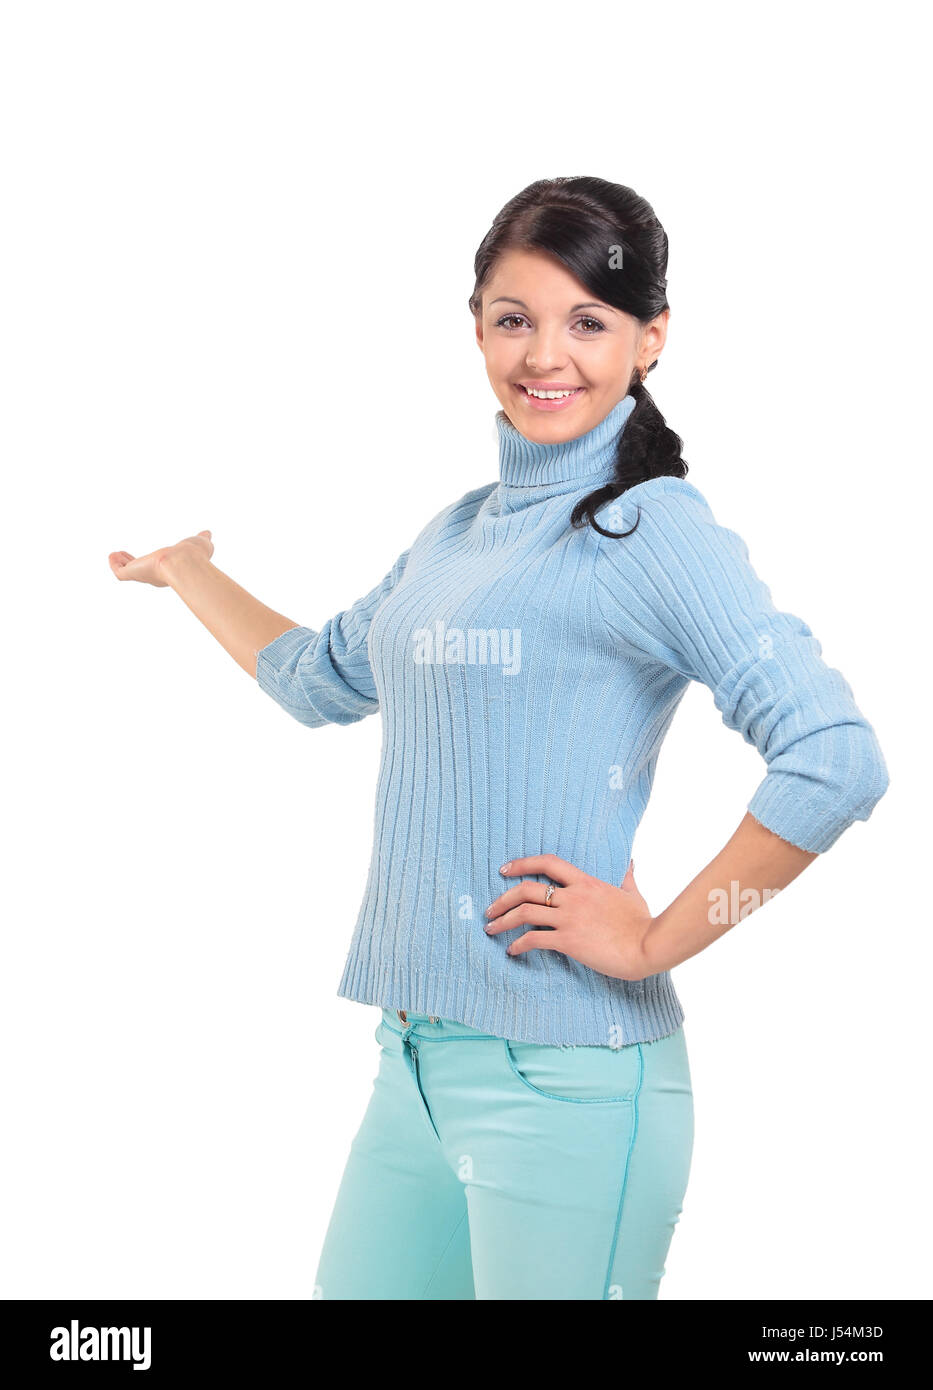 Portrait of businesswoman pointing at something. Stock Photo